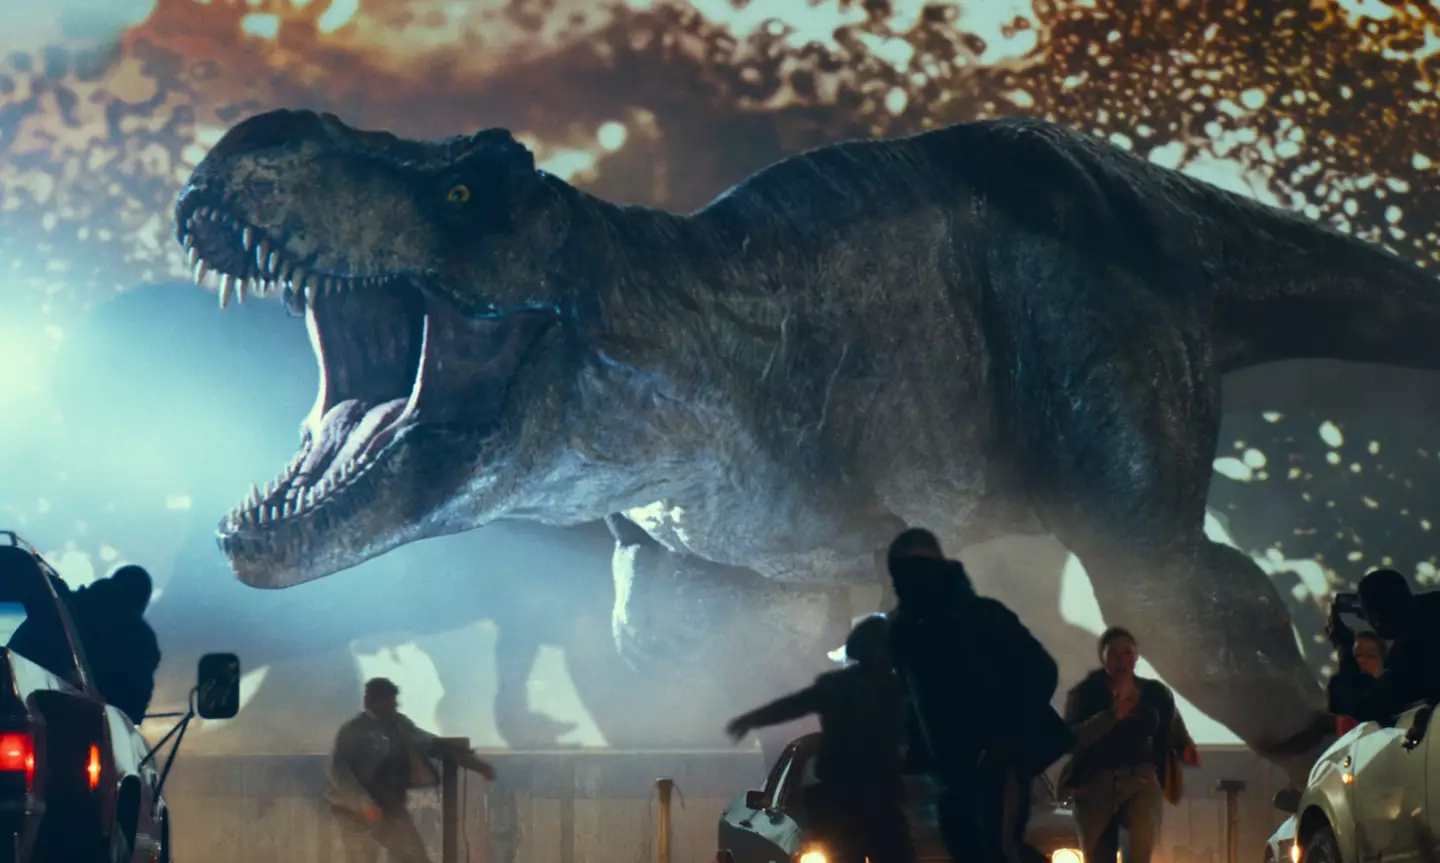 Jurassic World: Dominion is set to be released in cinemas on 10 June.